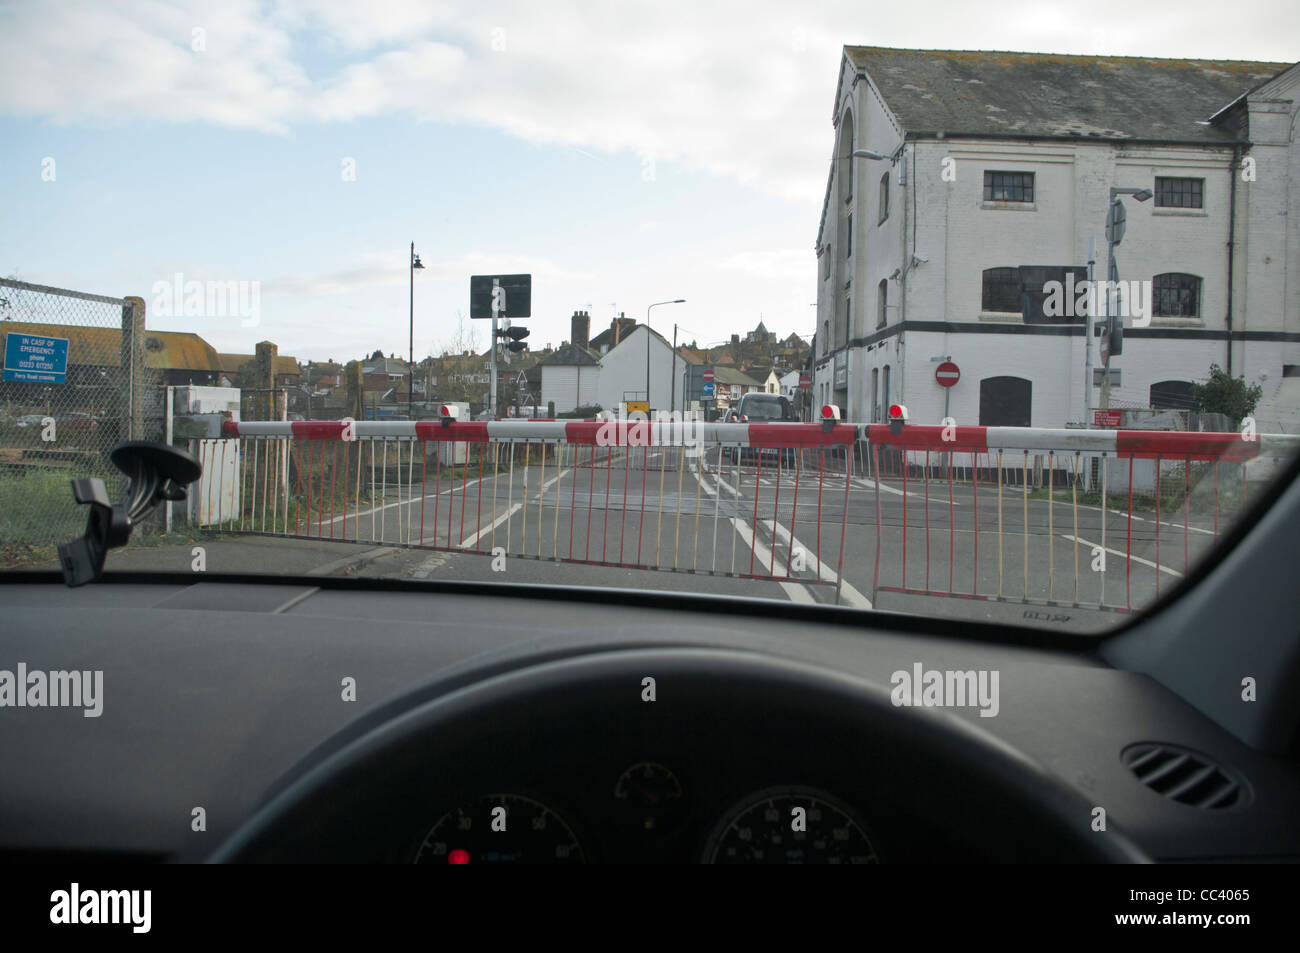 Train Railway Level Crossing With The Barriers Down As Seen Through A Car Windscreen Stock Photo